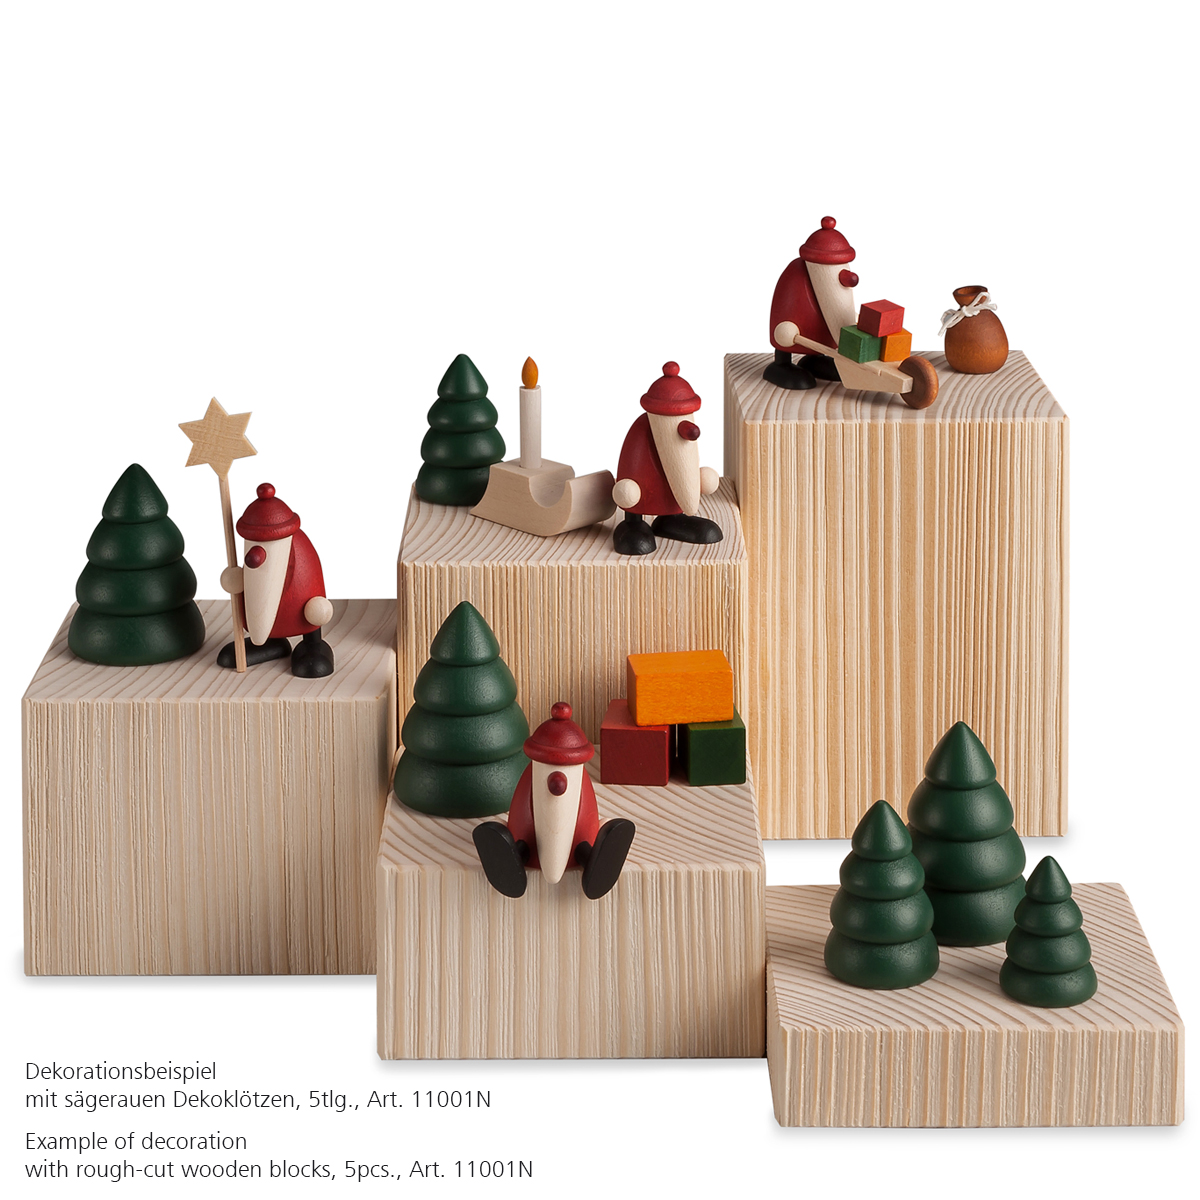 Set 5 | Santa Claus with a star and a tree